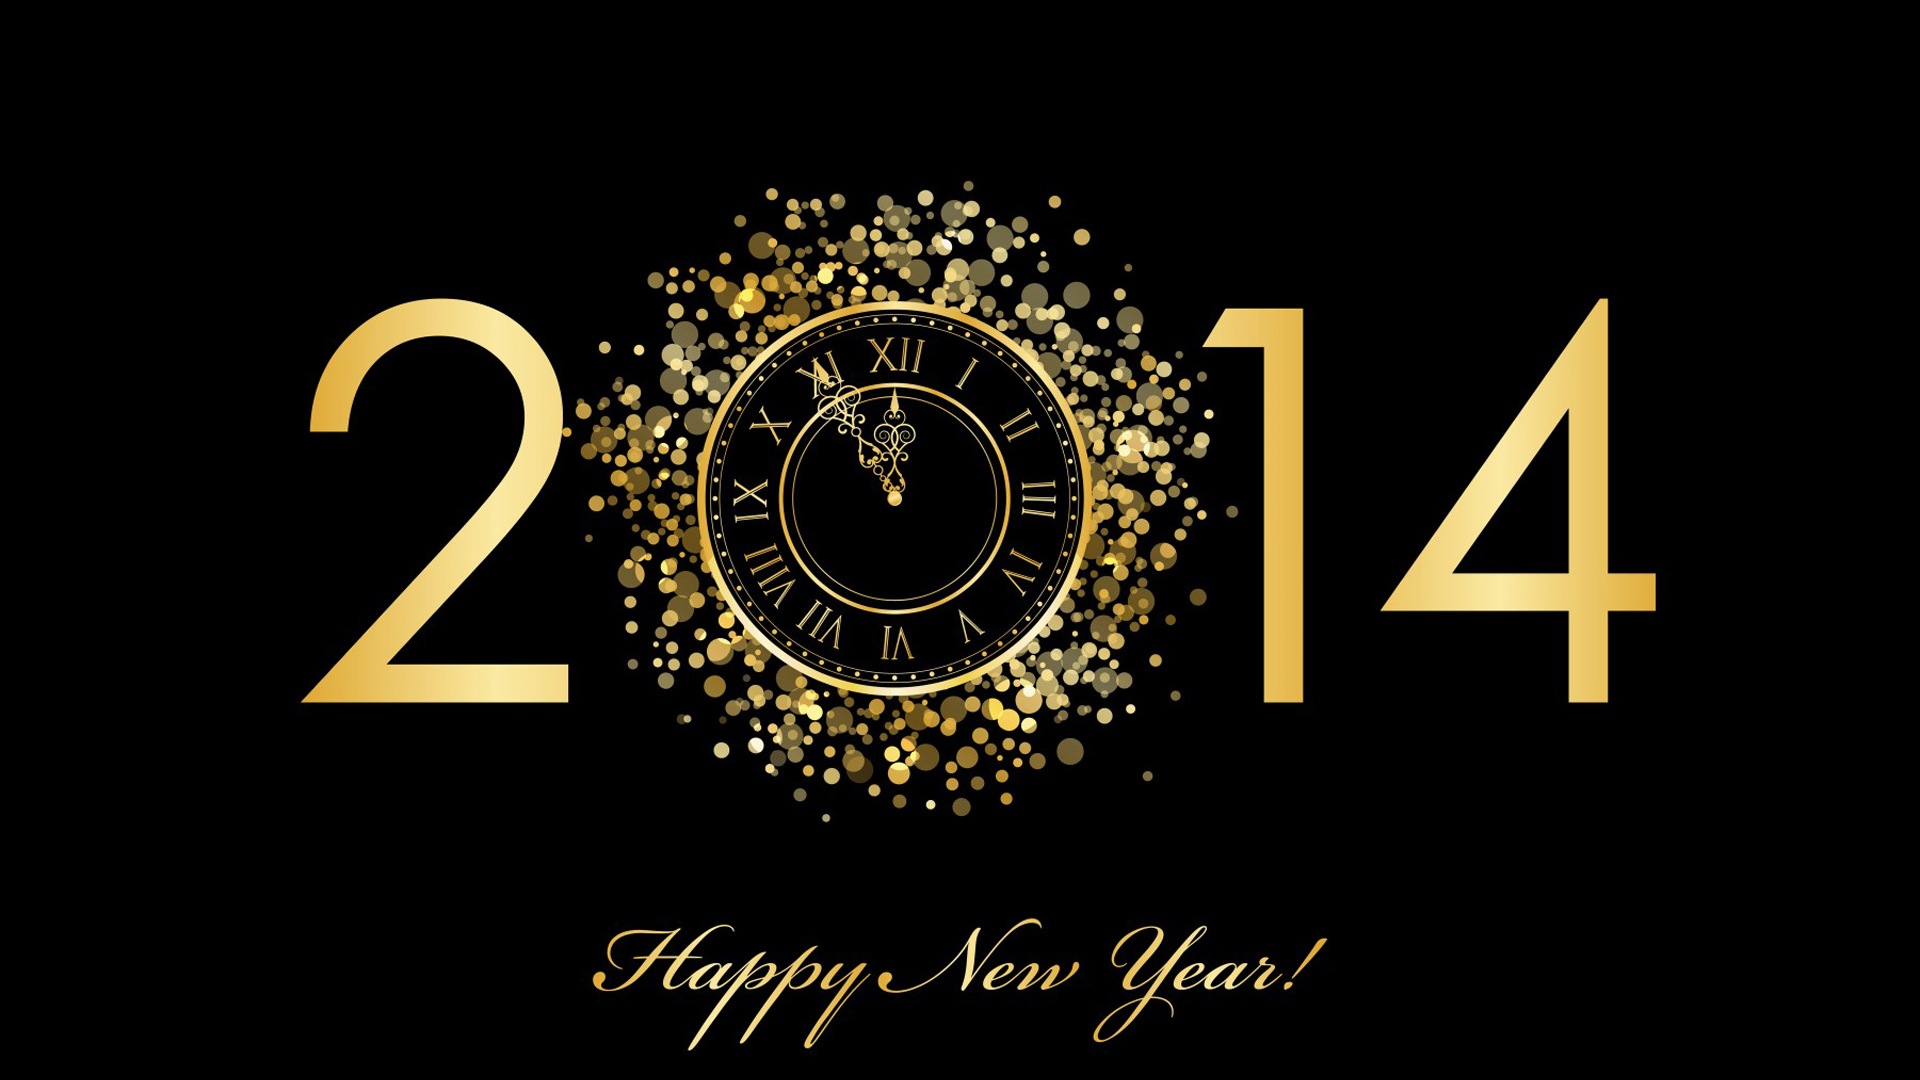 2014 New Year Theme HD Wallpapers (1) #1 - 1920x1080